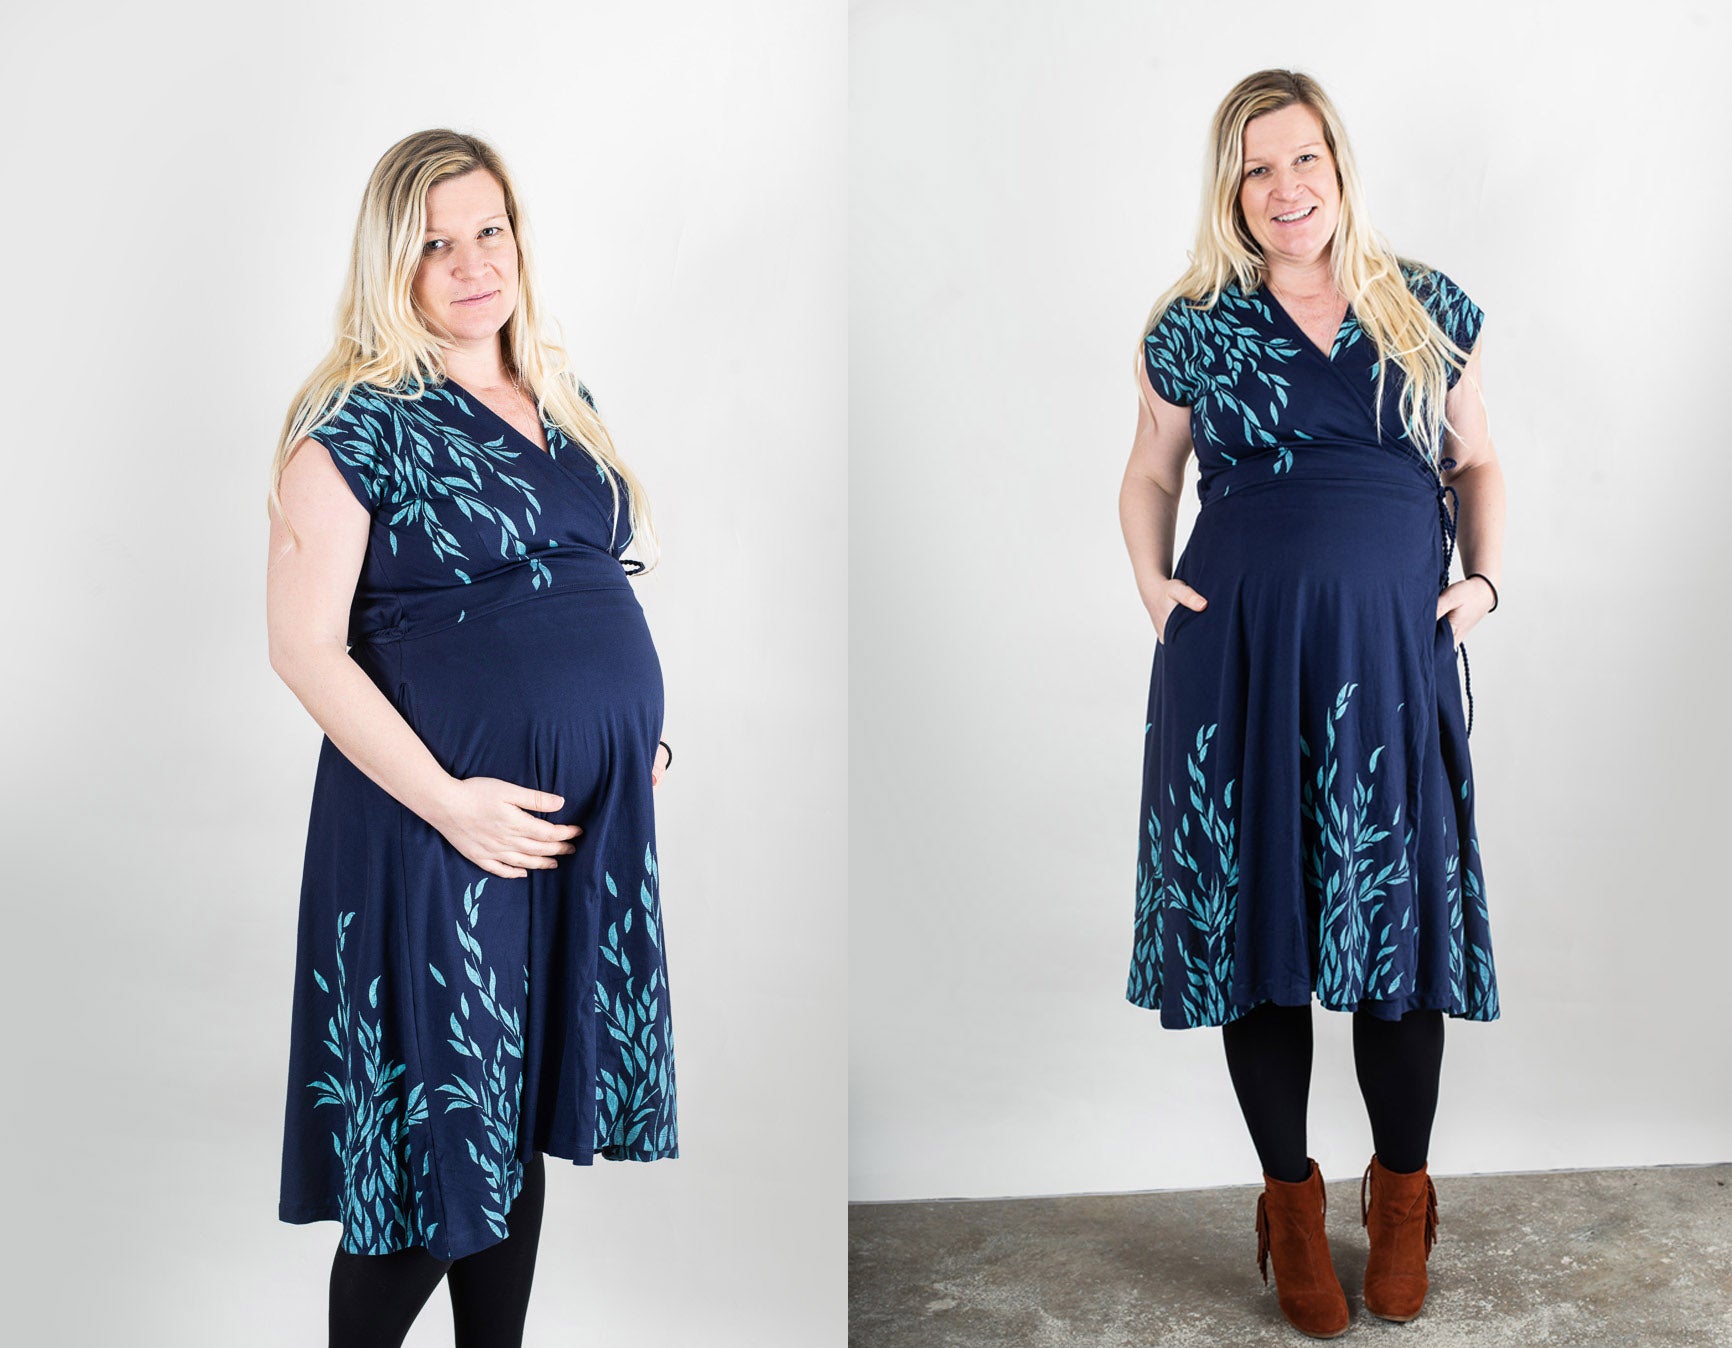 Green knot Front Maternity Dress